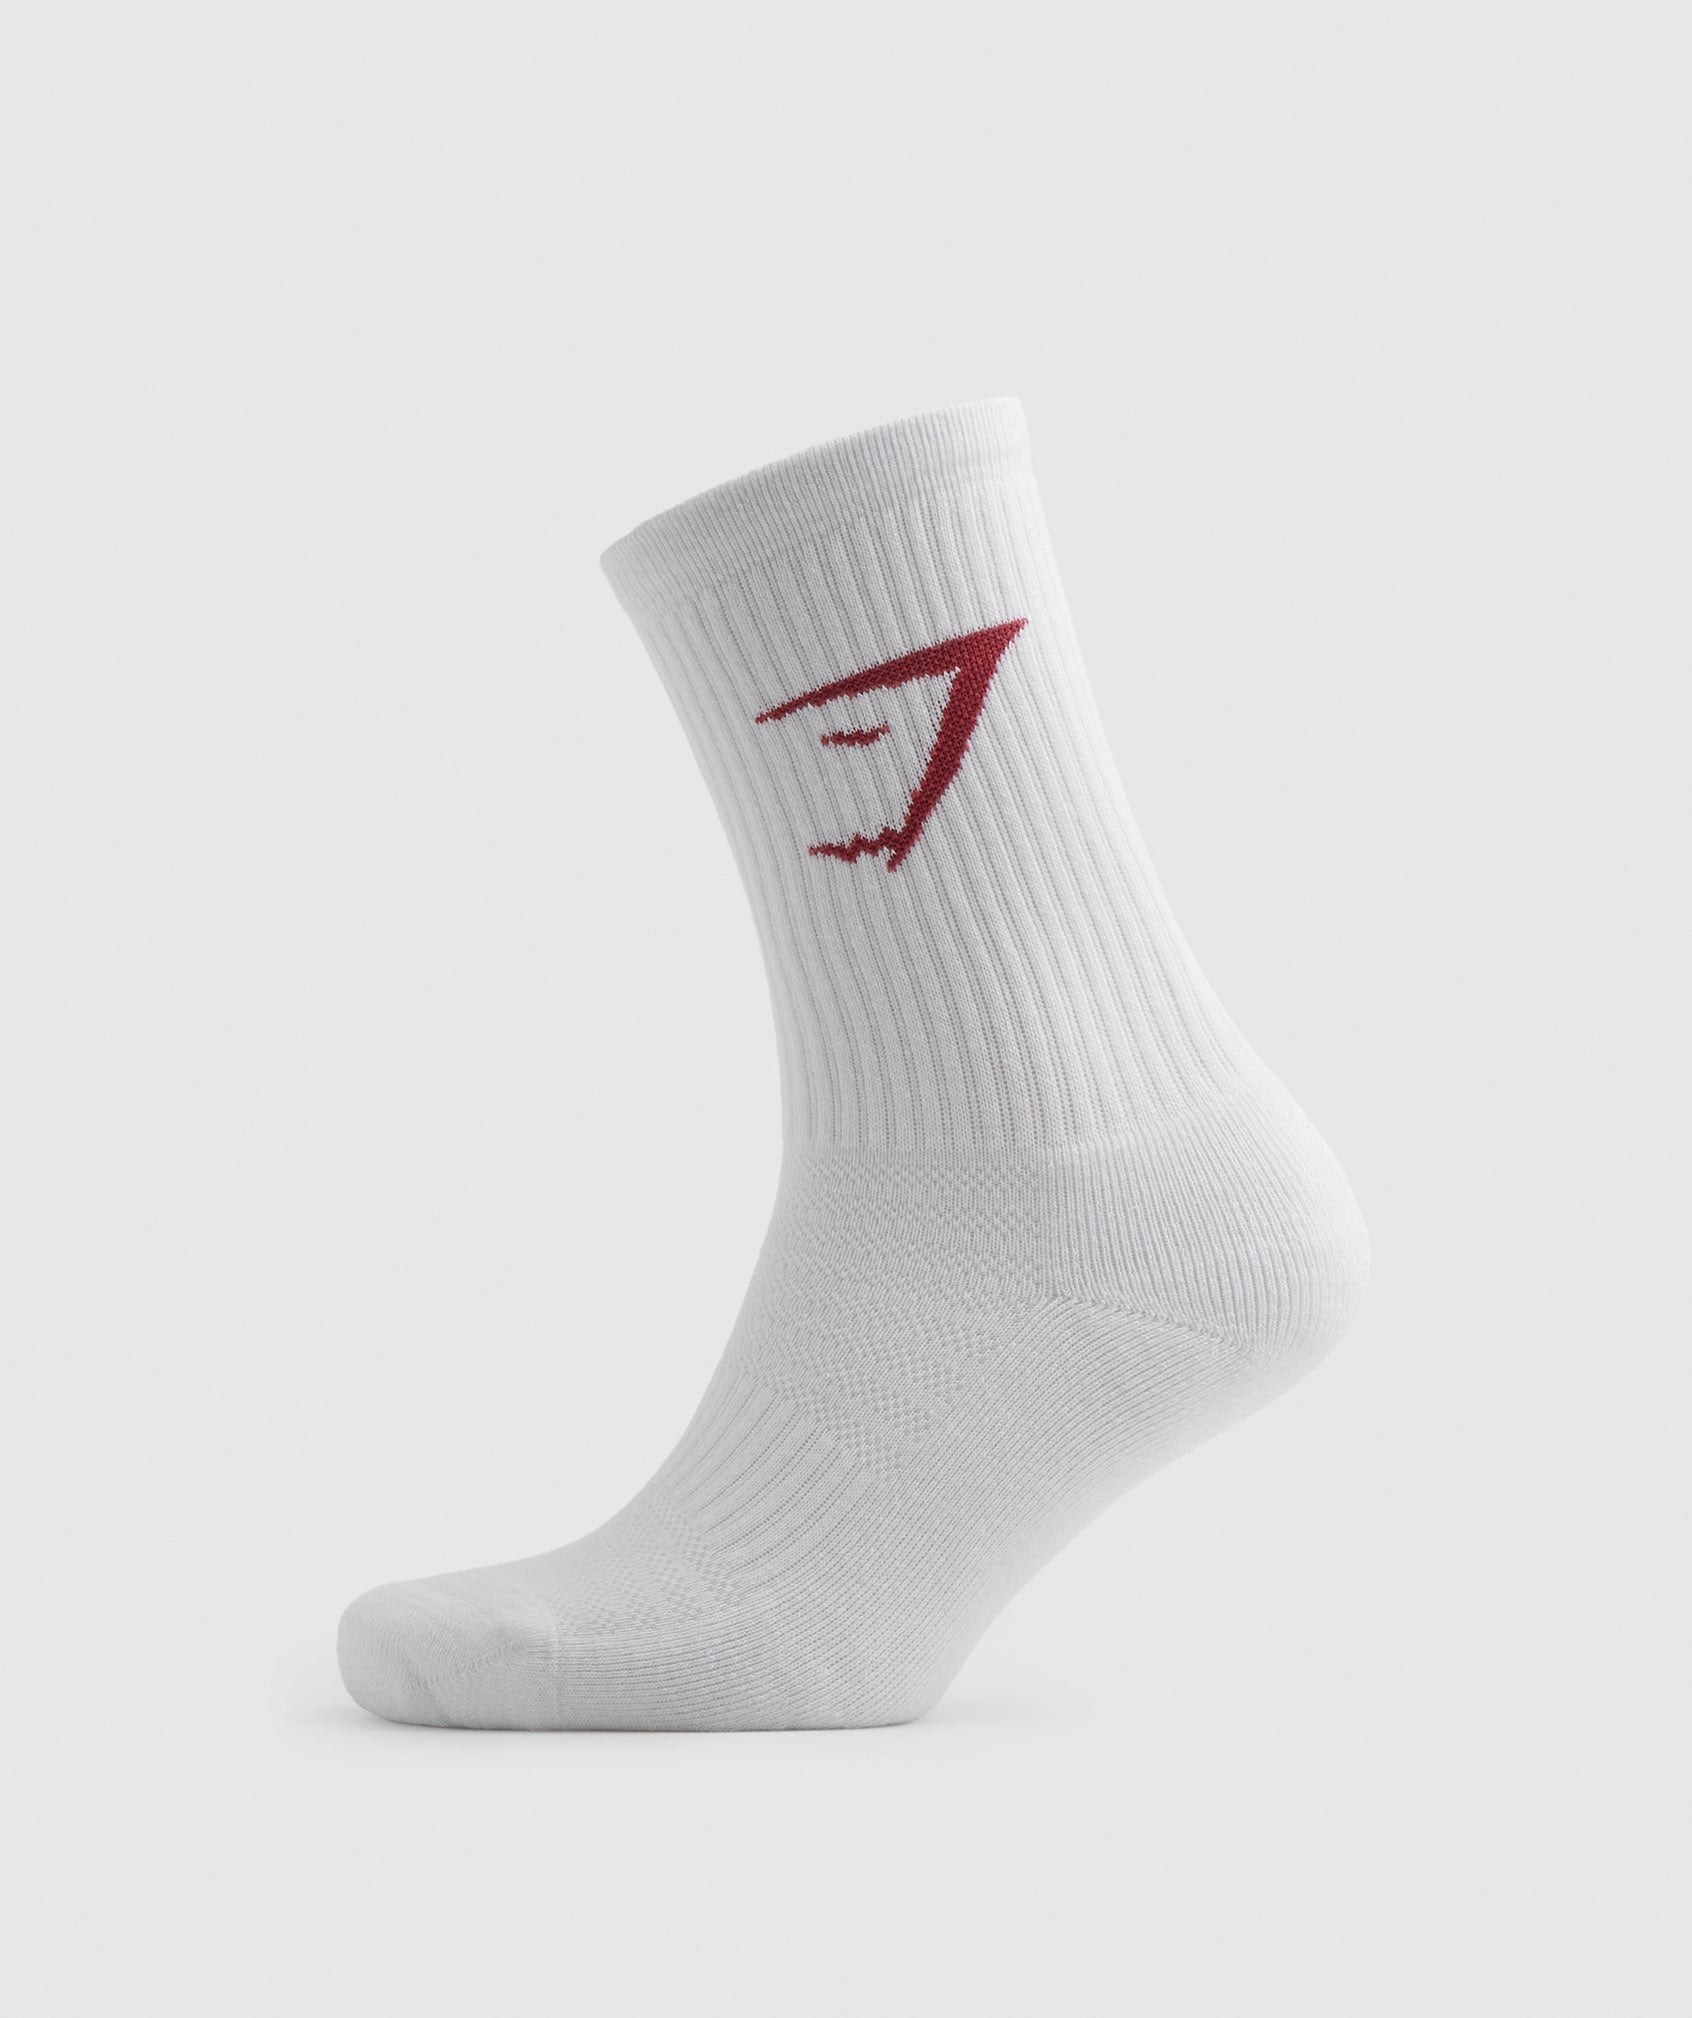 Crew Socks 3pk in White/Pink/Red - view 4